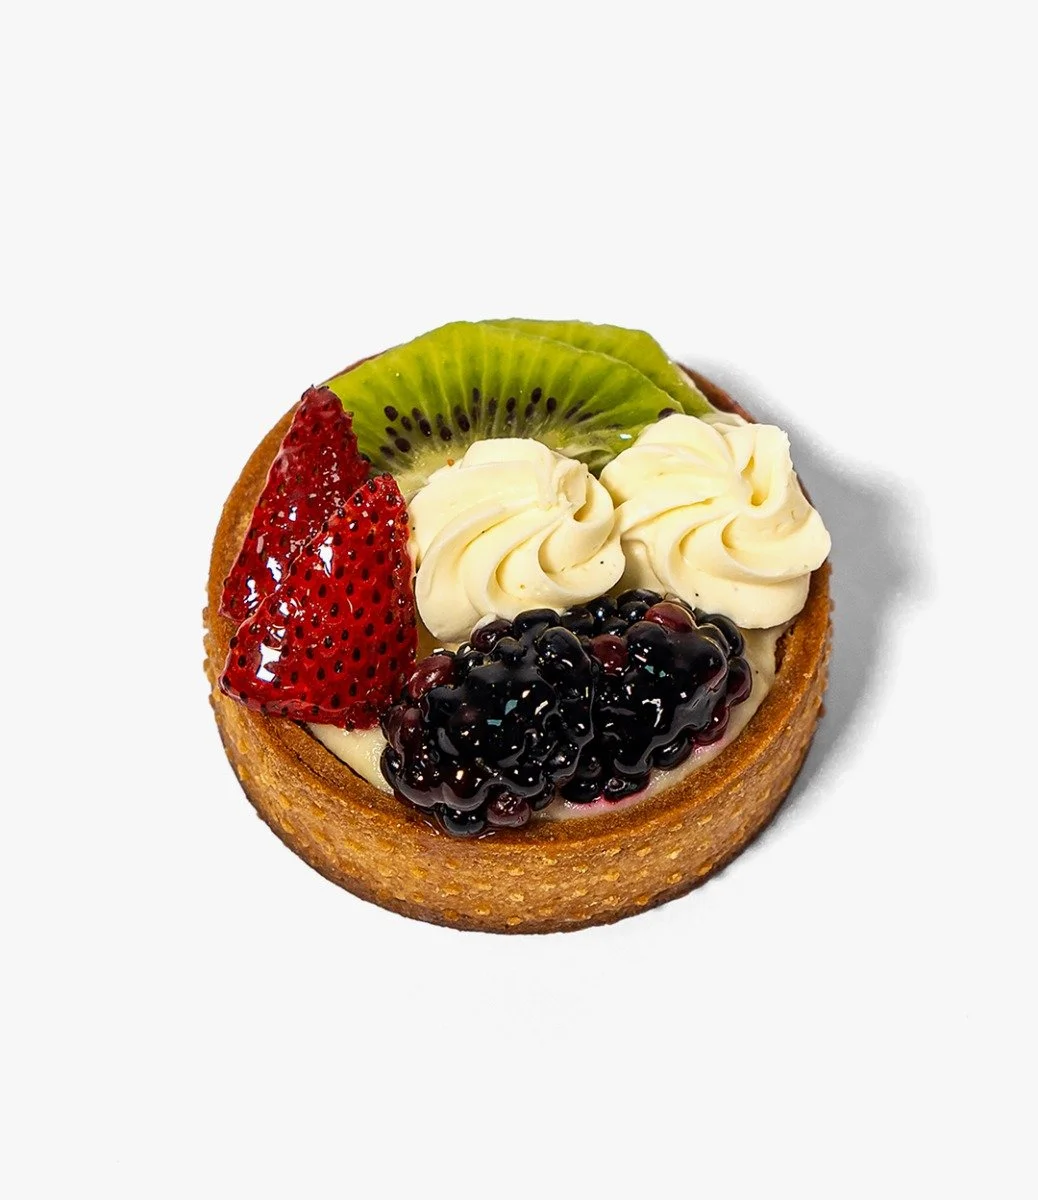 Flag Fruit Pie by Yamanote Atelier